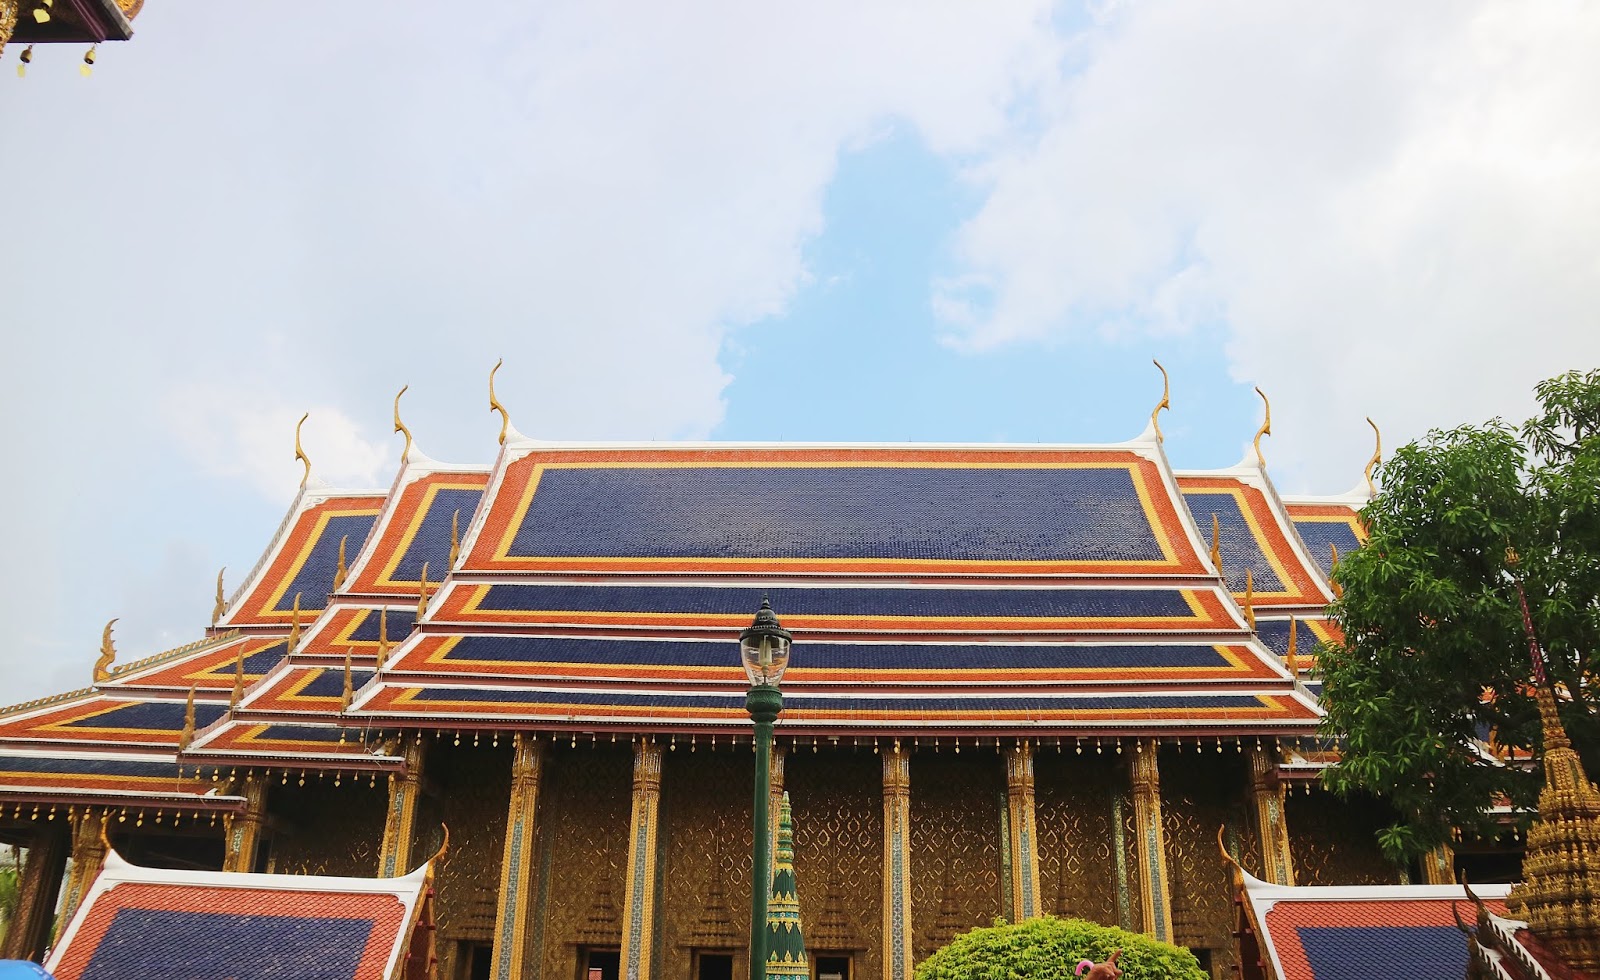 The Grand Palace and Temple of the Emerald Buddha